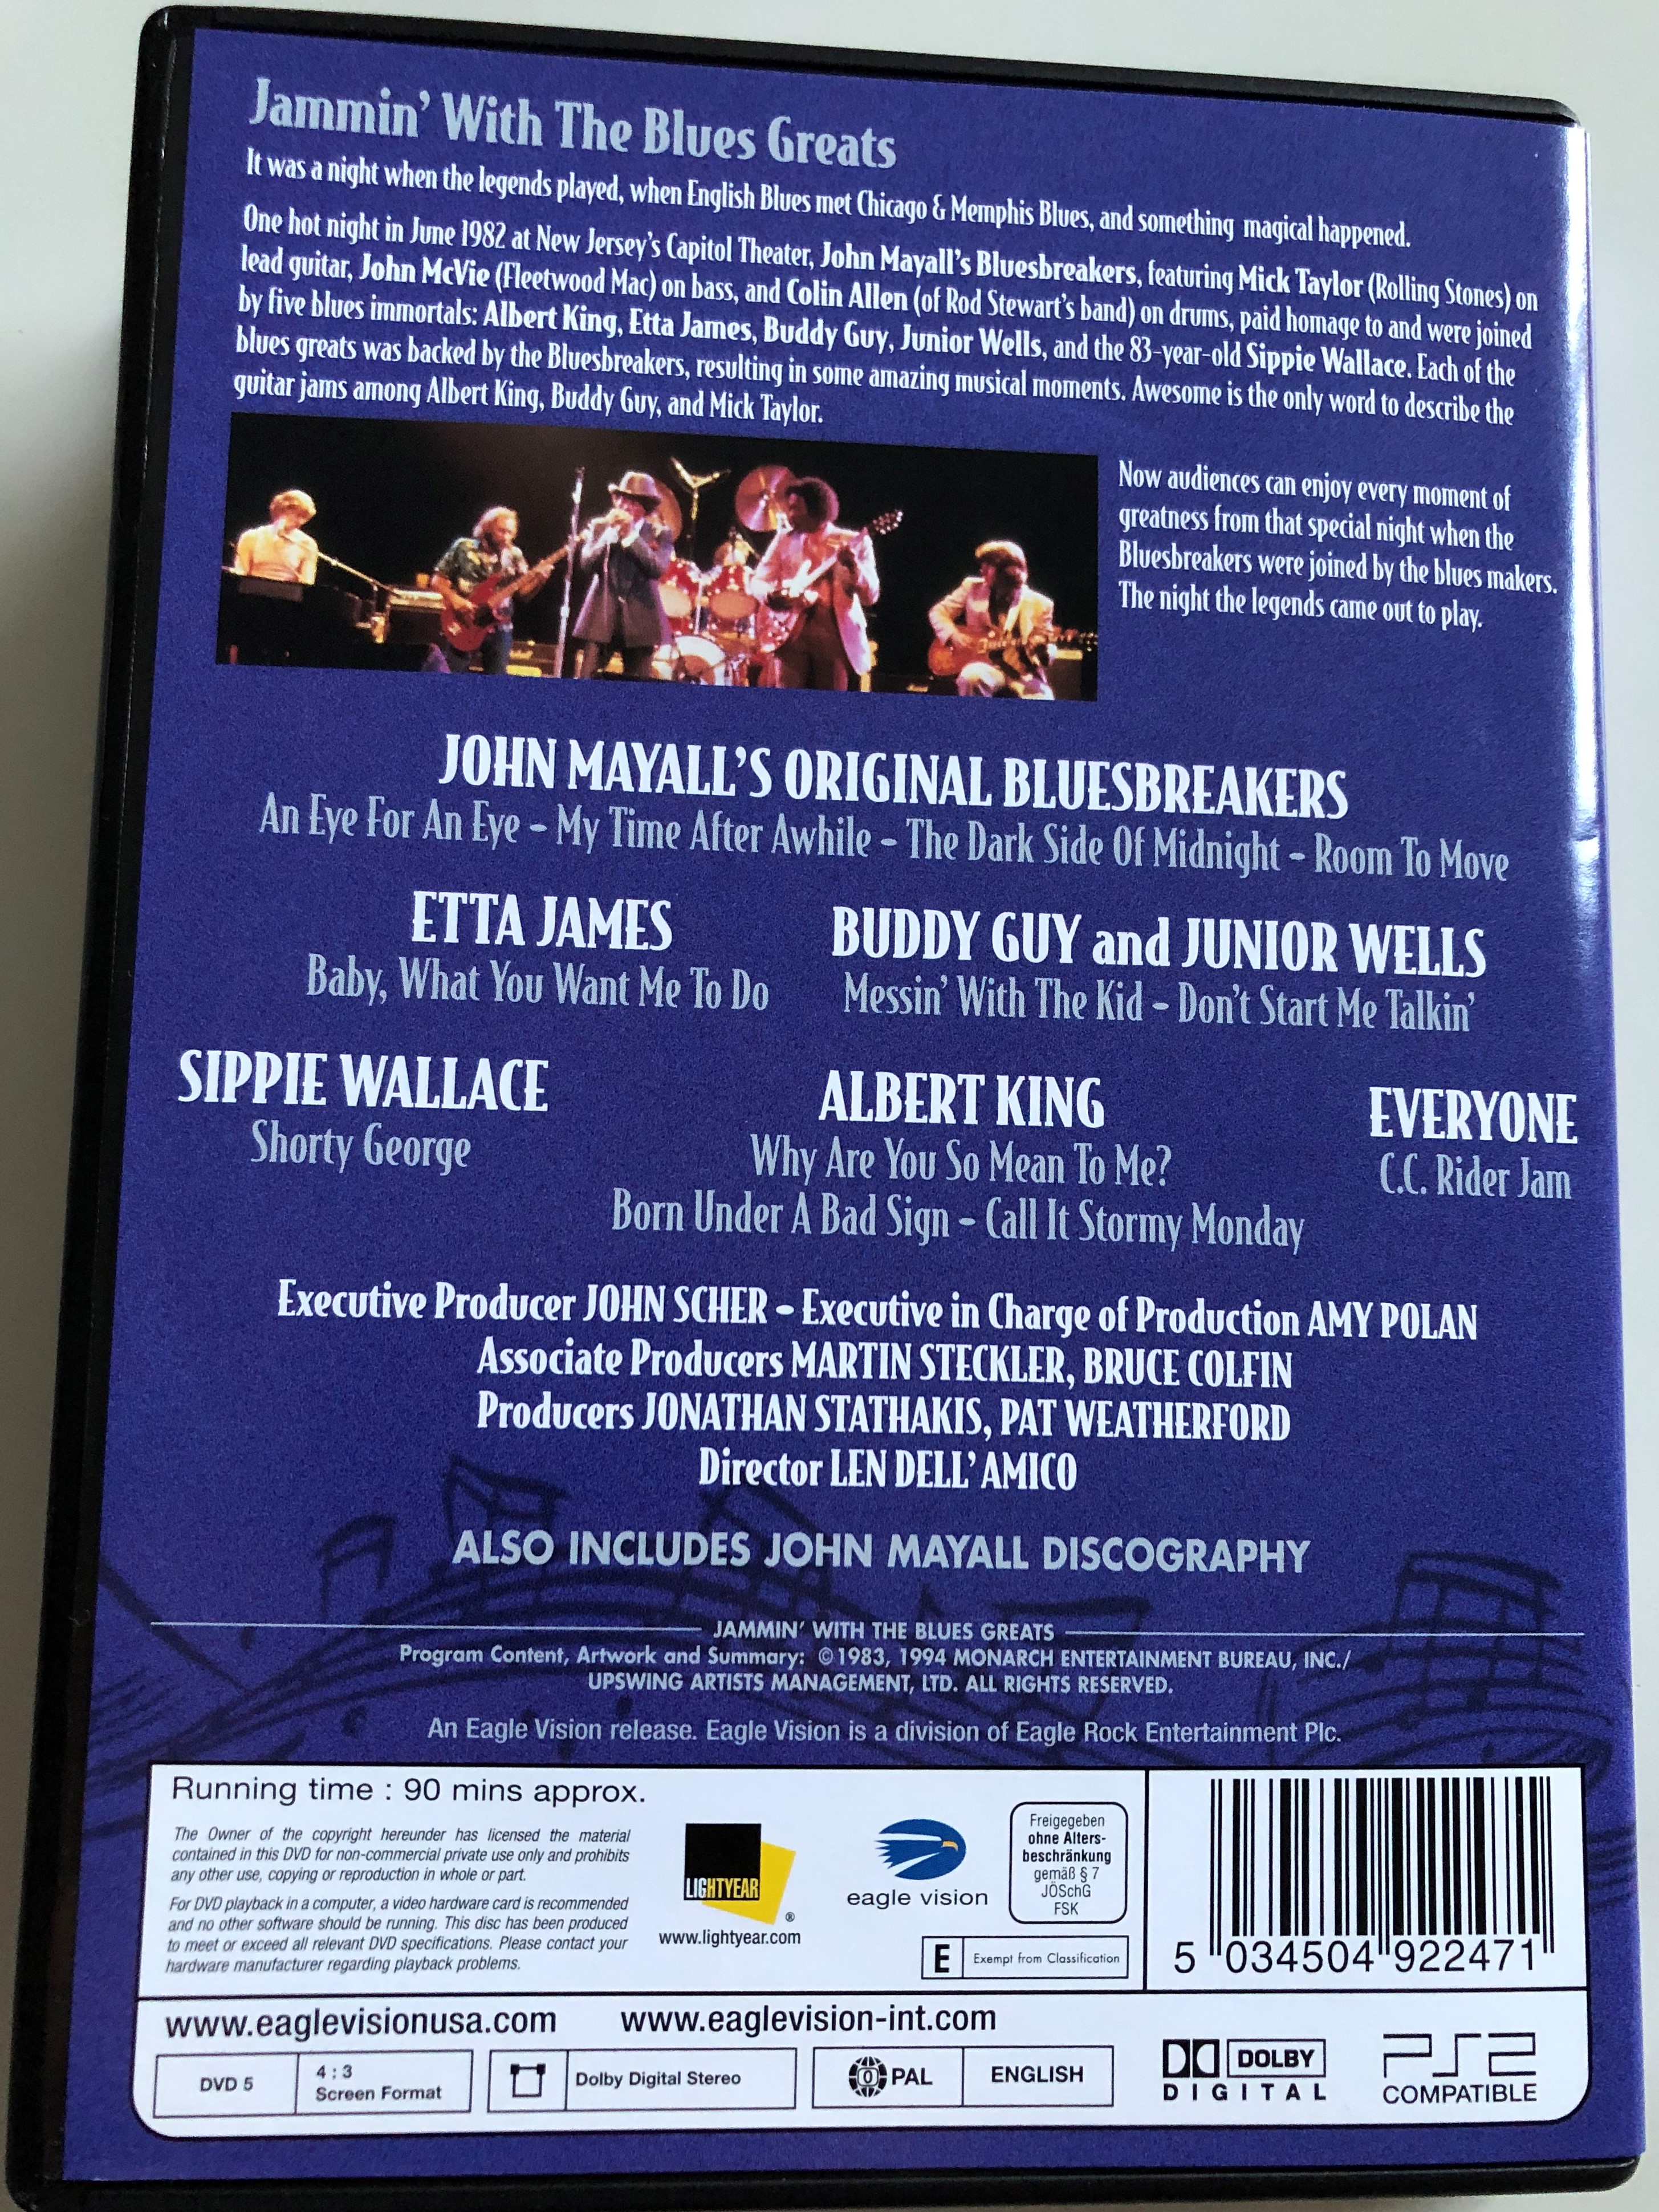 jammin-with-the-blues-greats-dvd-1994-featuring-john-mayall-and-the-original-bluesbreakers-buddy-guy-etta-james-albert-king-sippie-wallace-junior-wells-4-.jpg